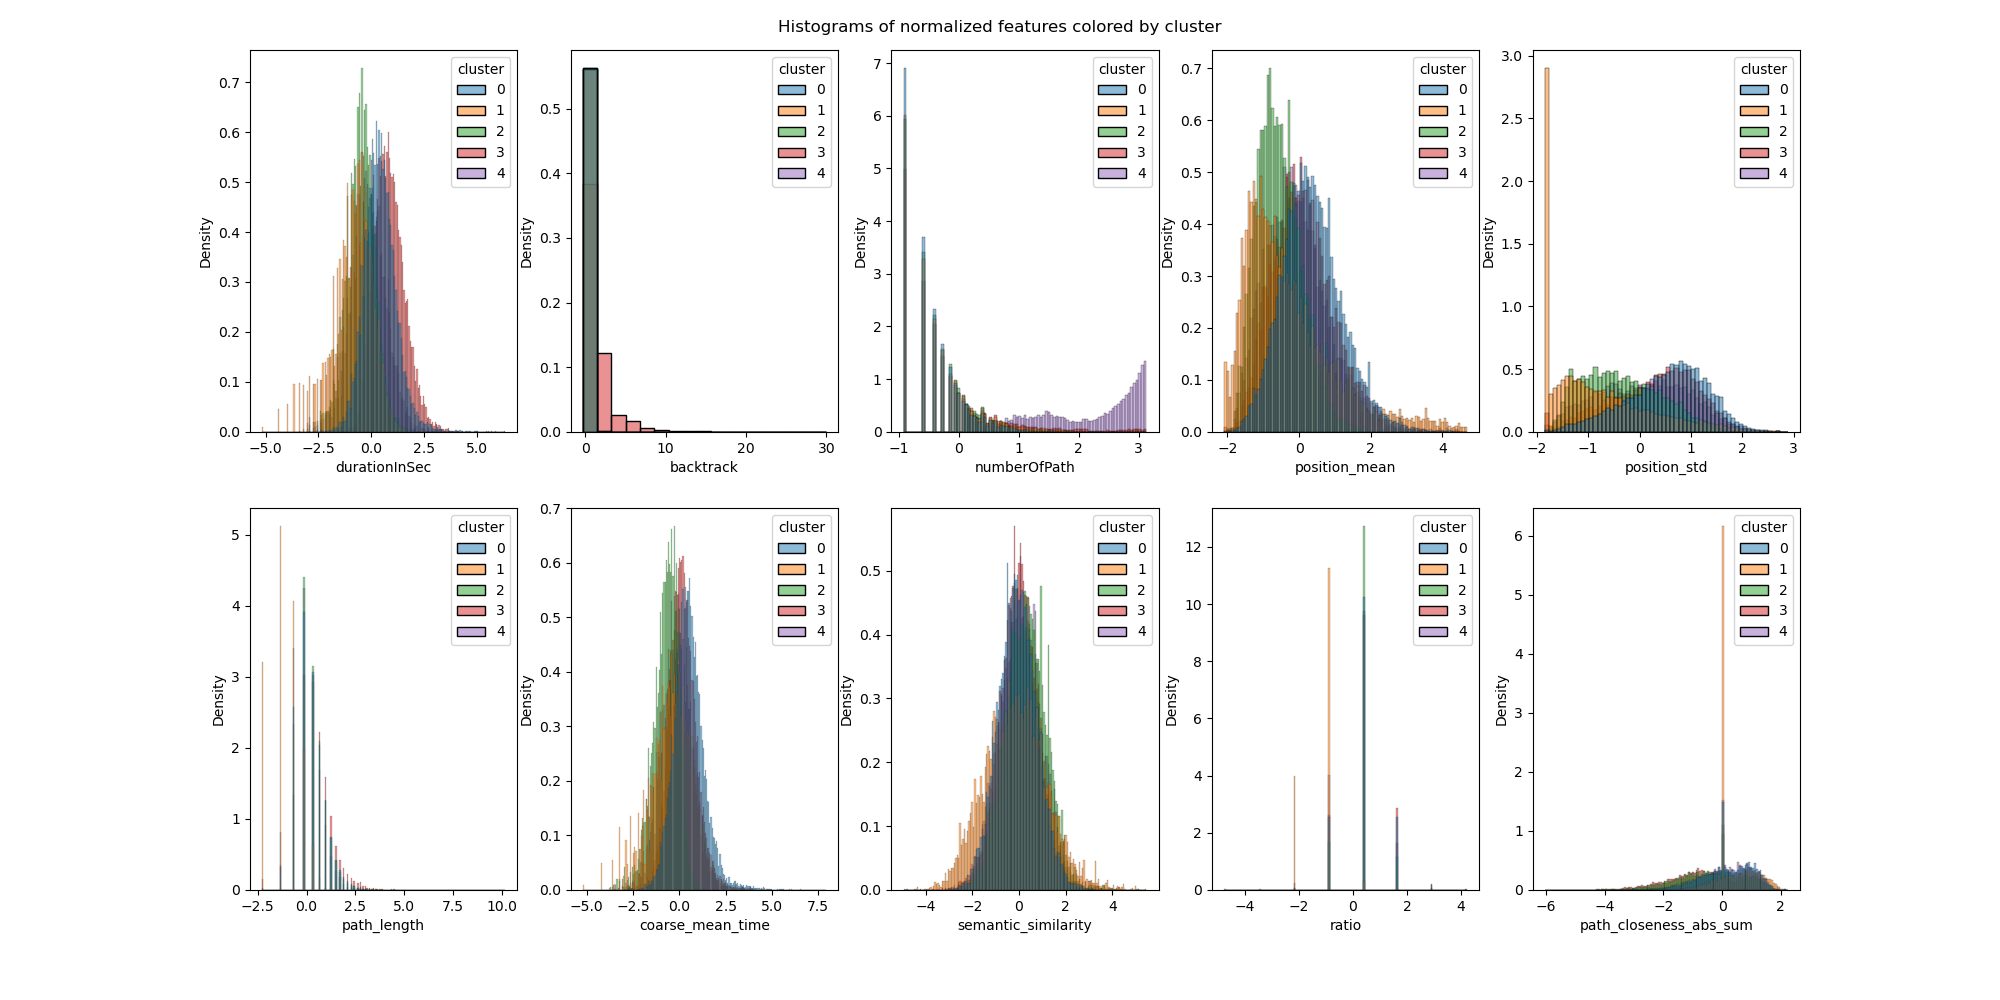 histograms_features_colored_by_cluster